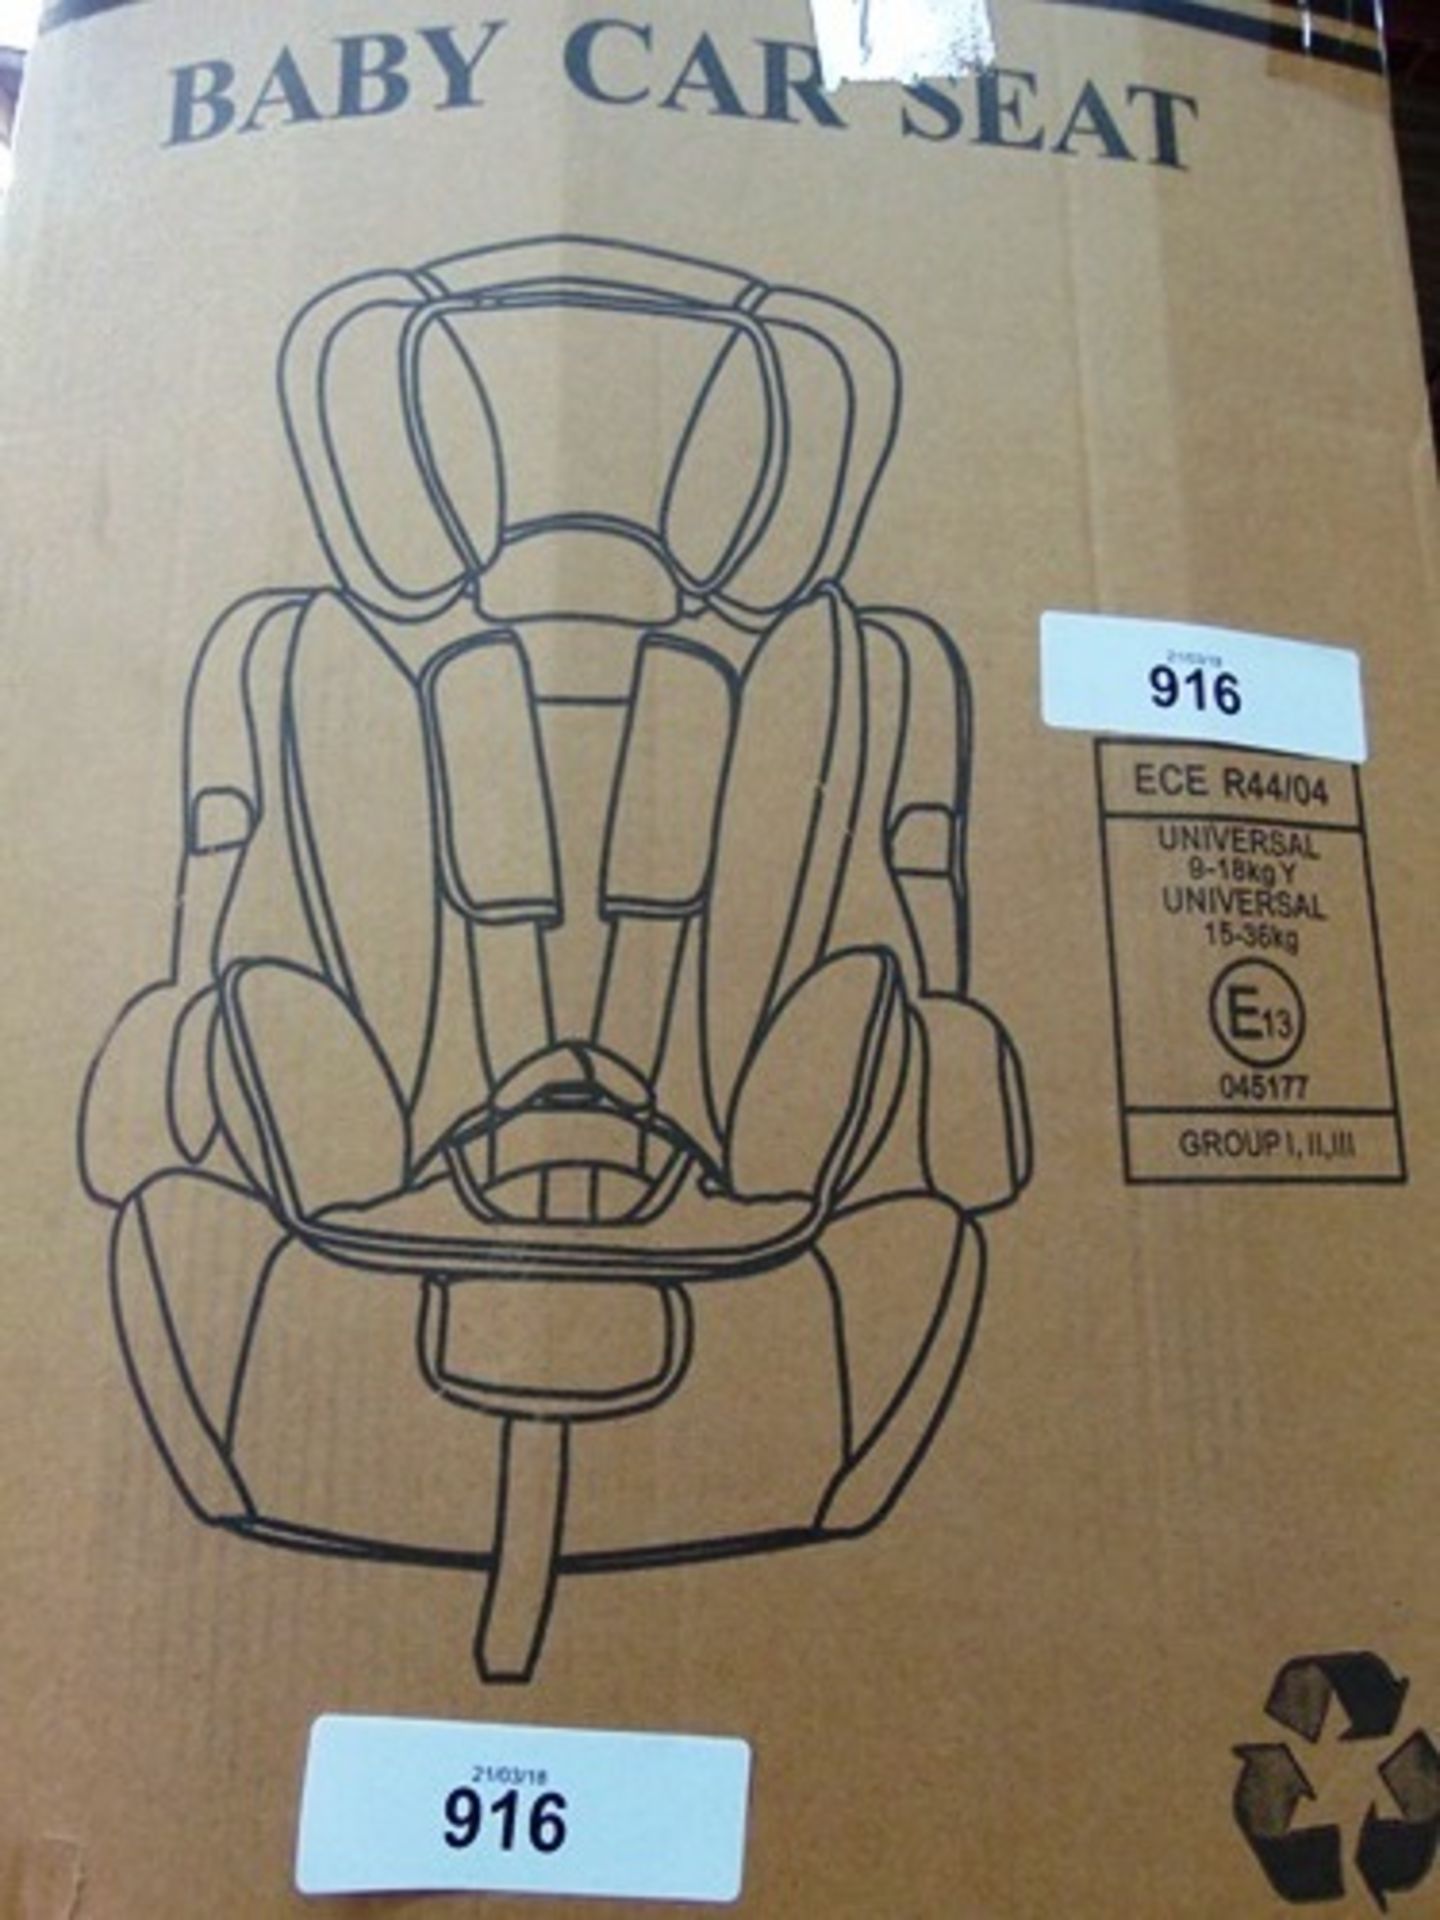 Baby car seat - New (GS8)